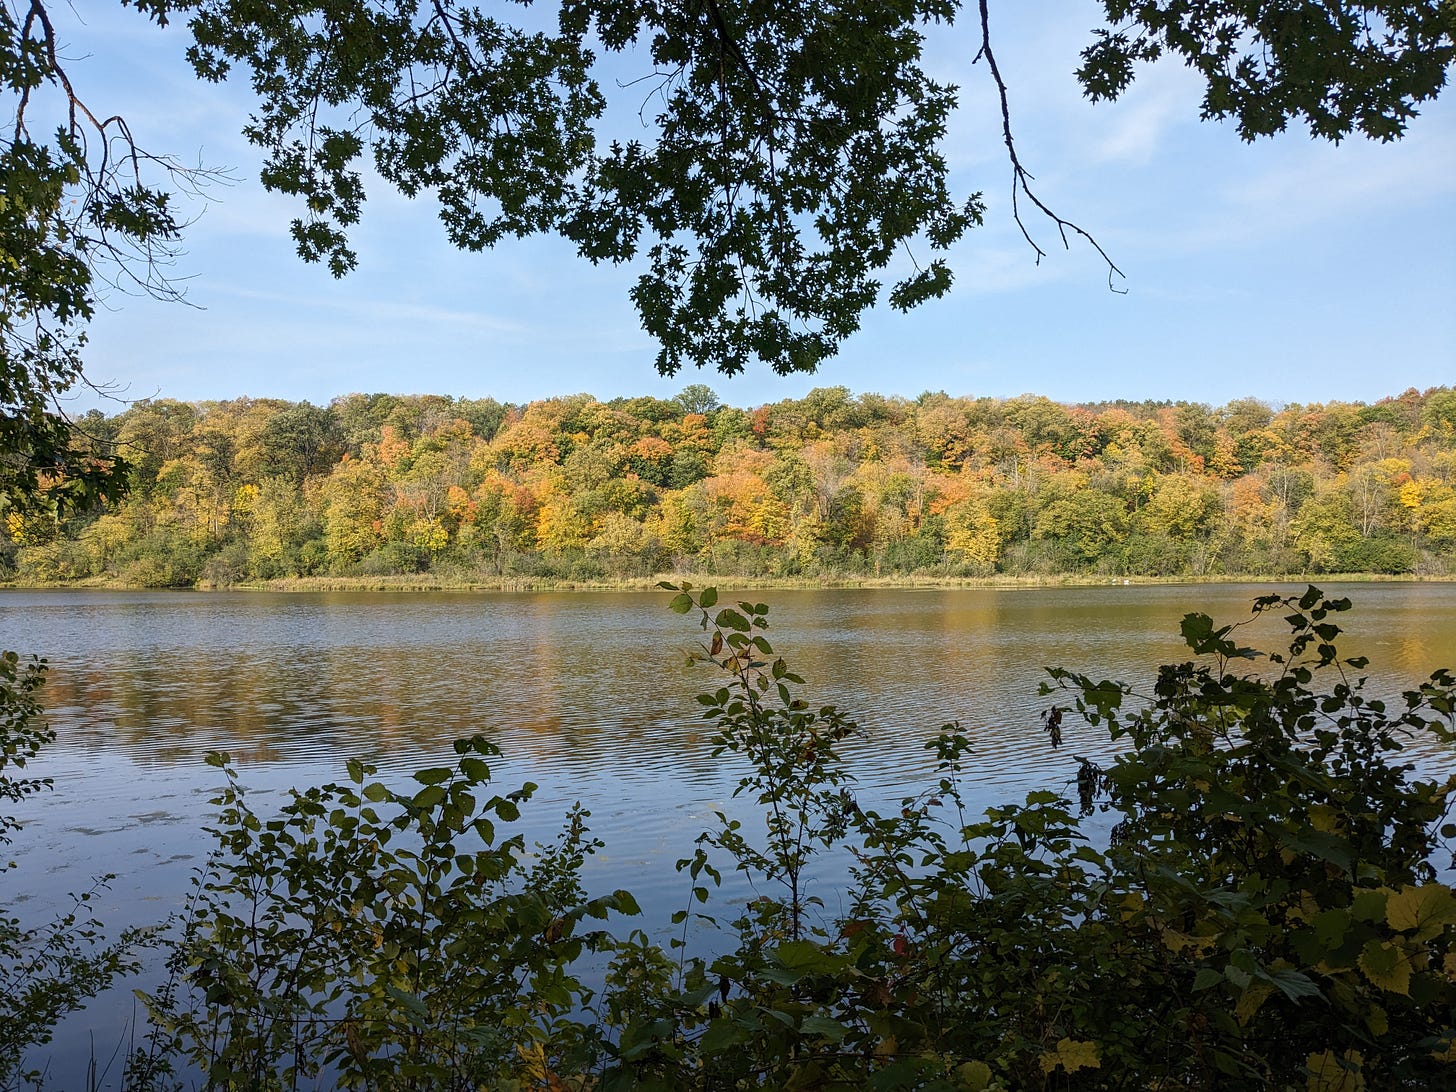 A landscape view of the St. Croix River, with a few yellow and orange trees on the opposite bank.